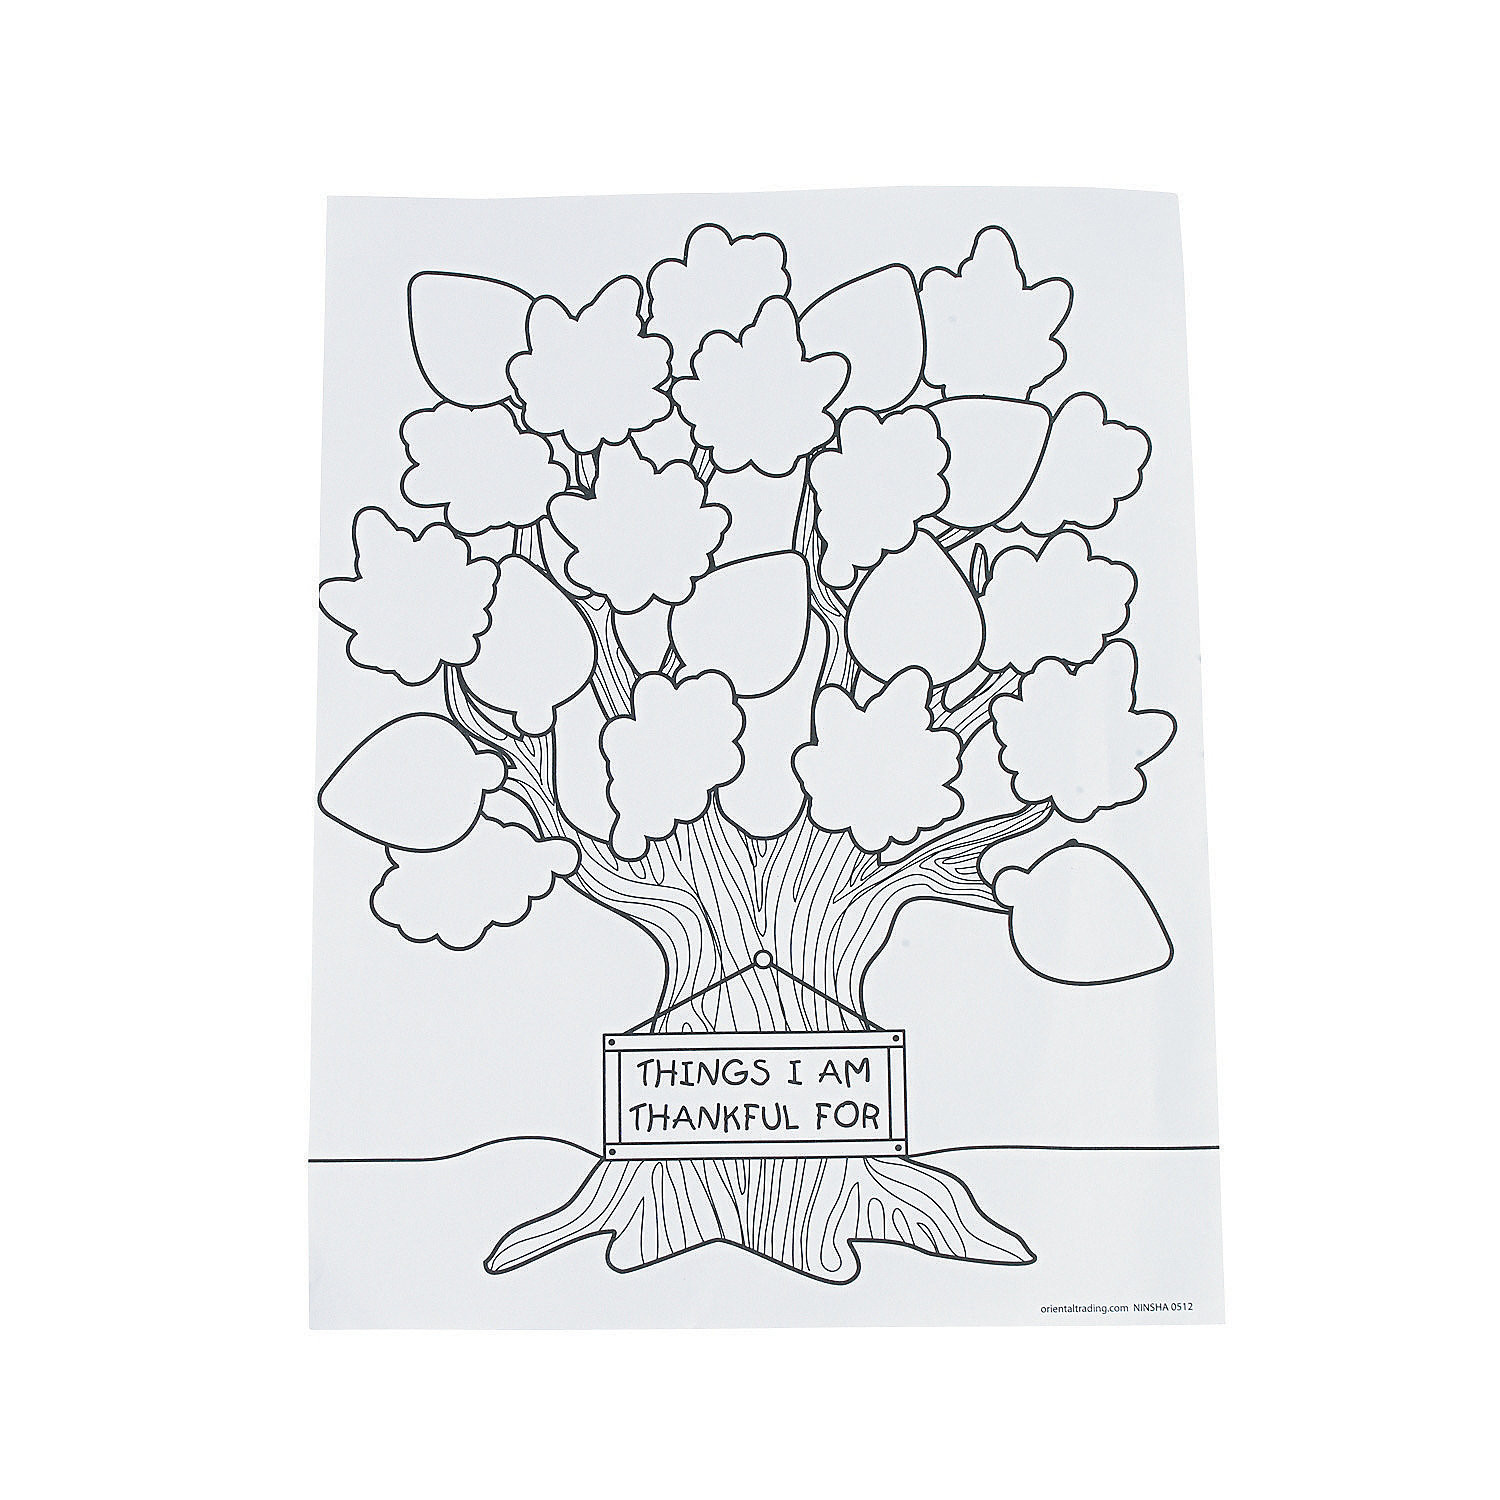 Oriental Trading Coloring Pages
 Tree of Thanks Coloring Sheets Oriental Trading